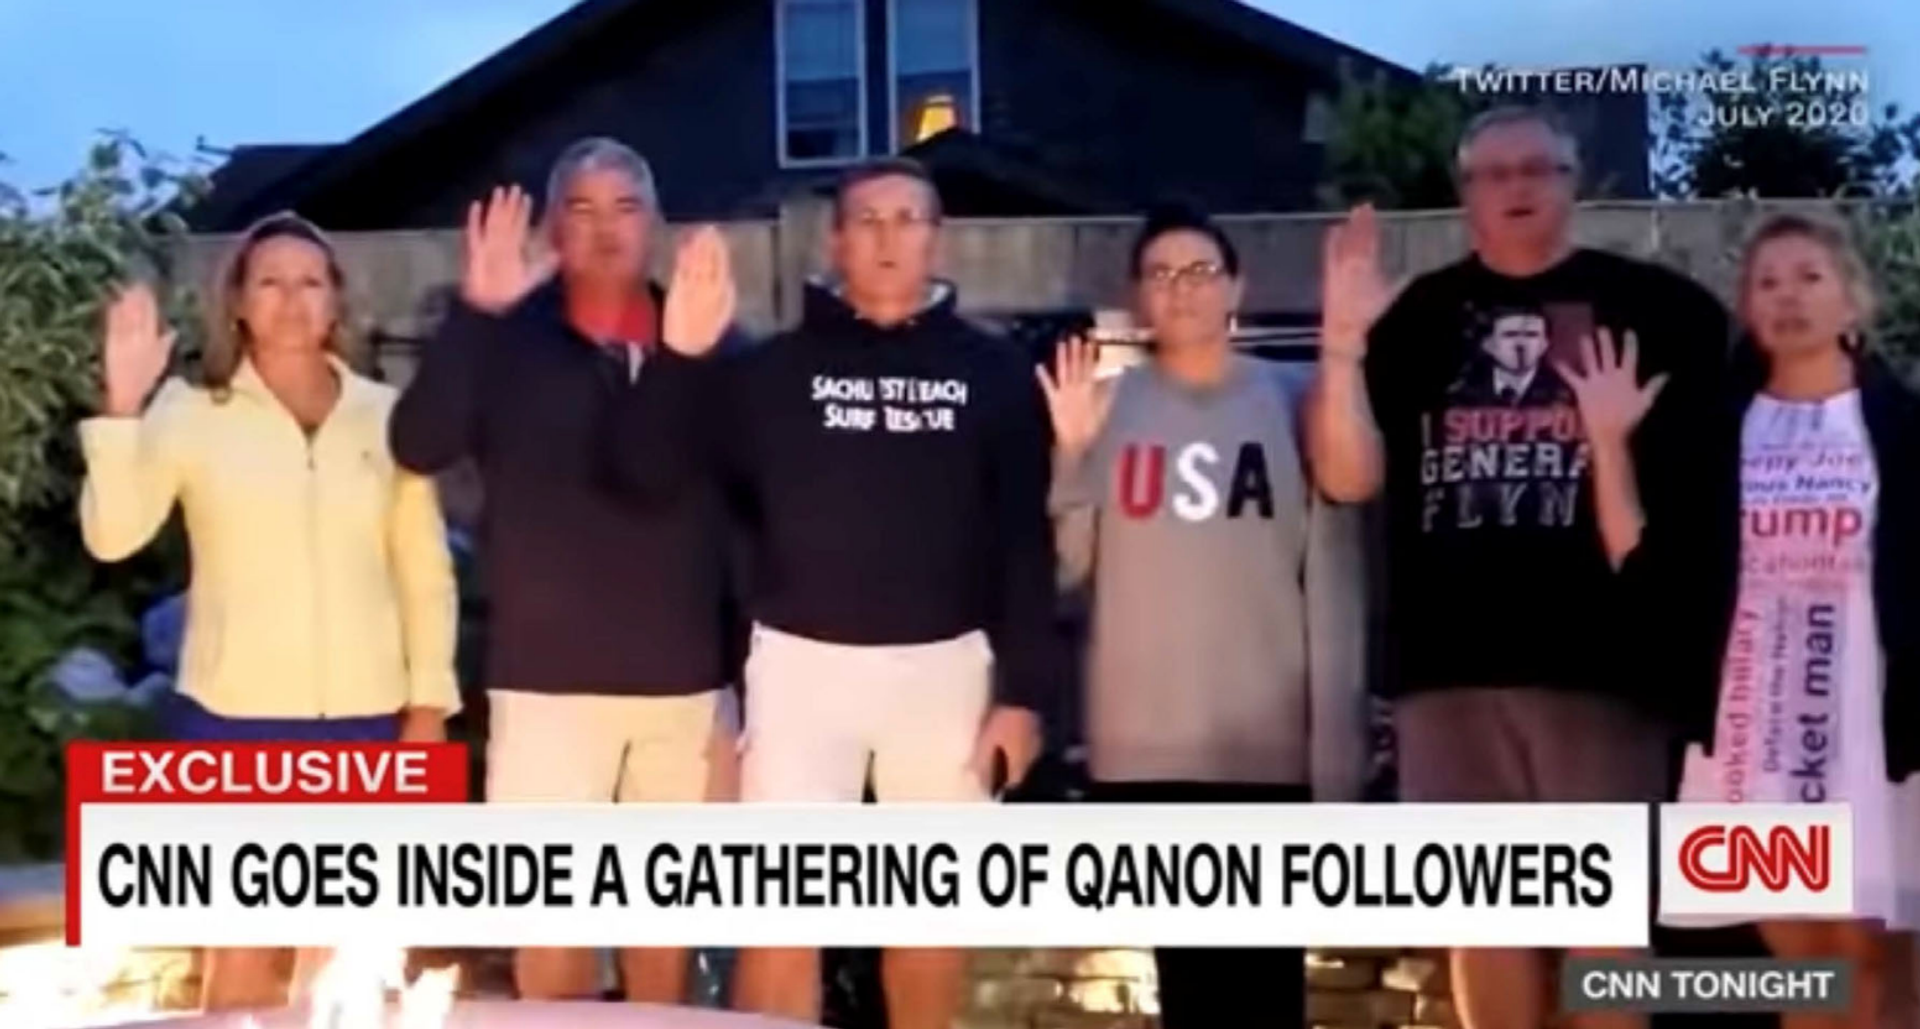 A screenshot from the CNN report of the Flynn family with their hands raised as Michael Flynn says "Where We Go One, We Go All"